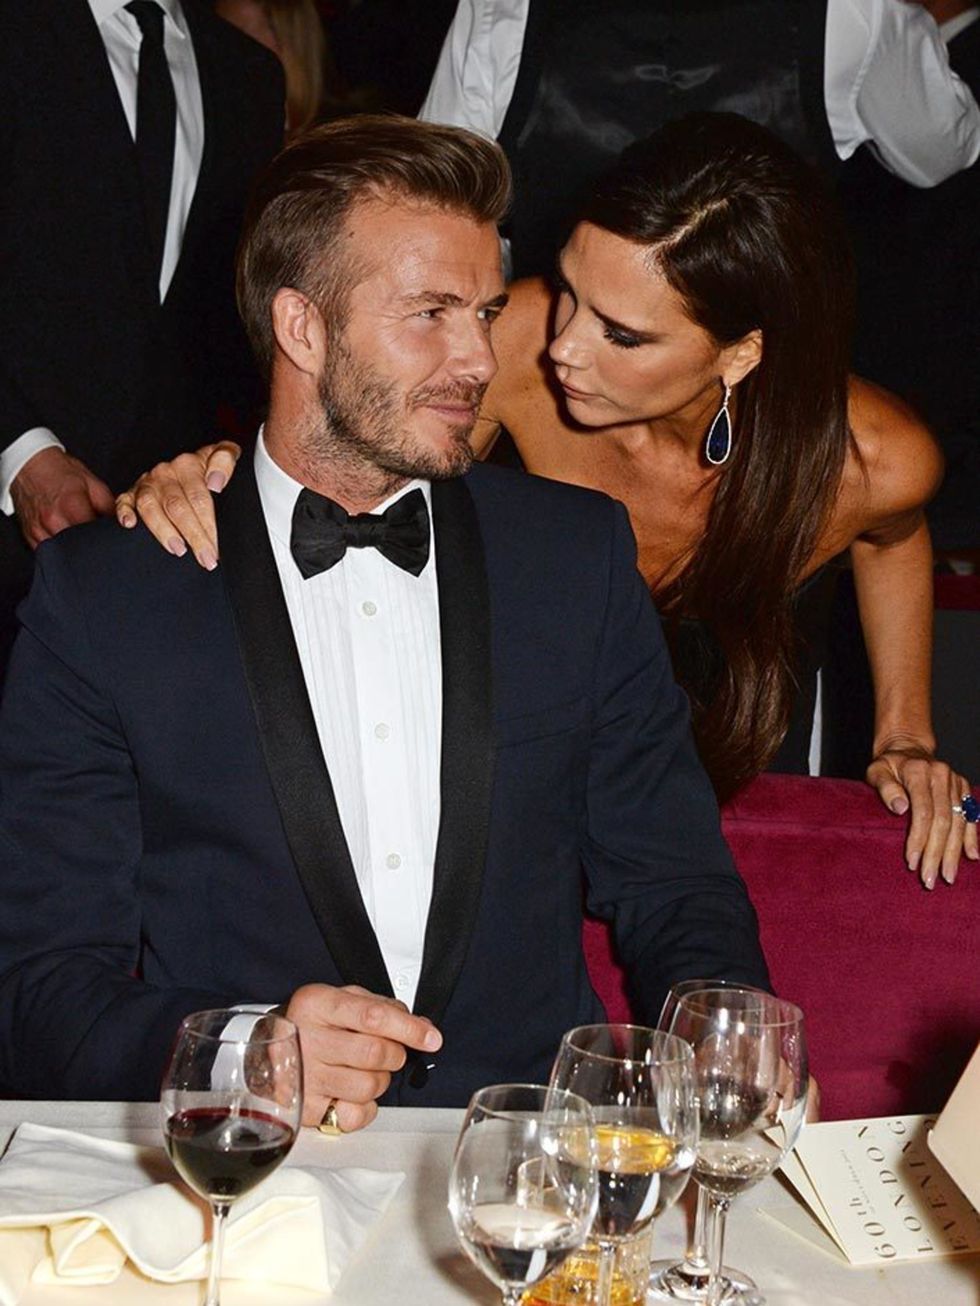 <p>Victoria and David Beckha</p>

<p>You could say this couple really has lived by their 'for better or worse' vows, but at the end of it all, they're still going strong. David recently posted a throwback pic of them on instagram with the caption, "16 yea